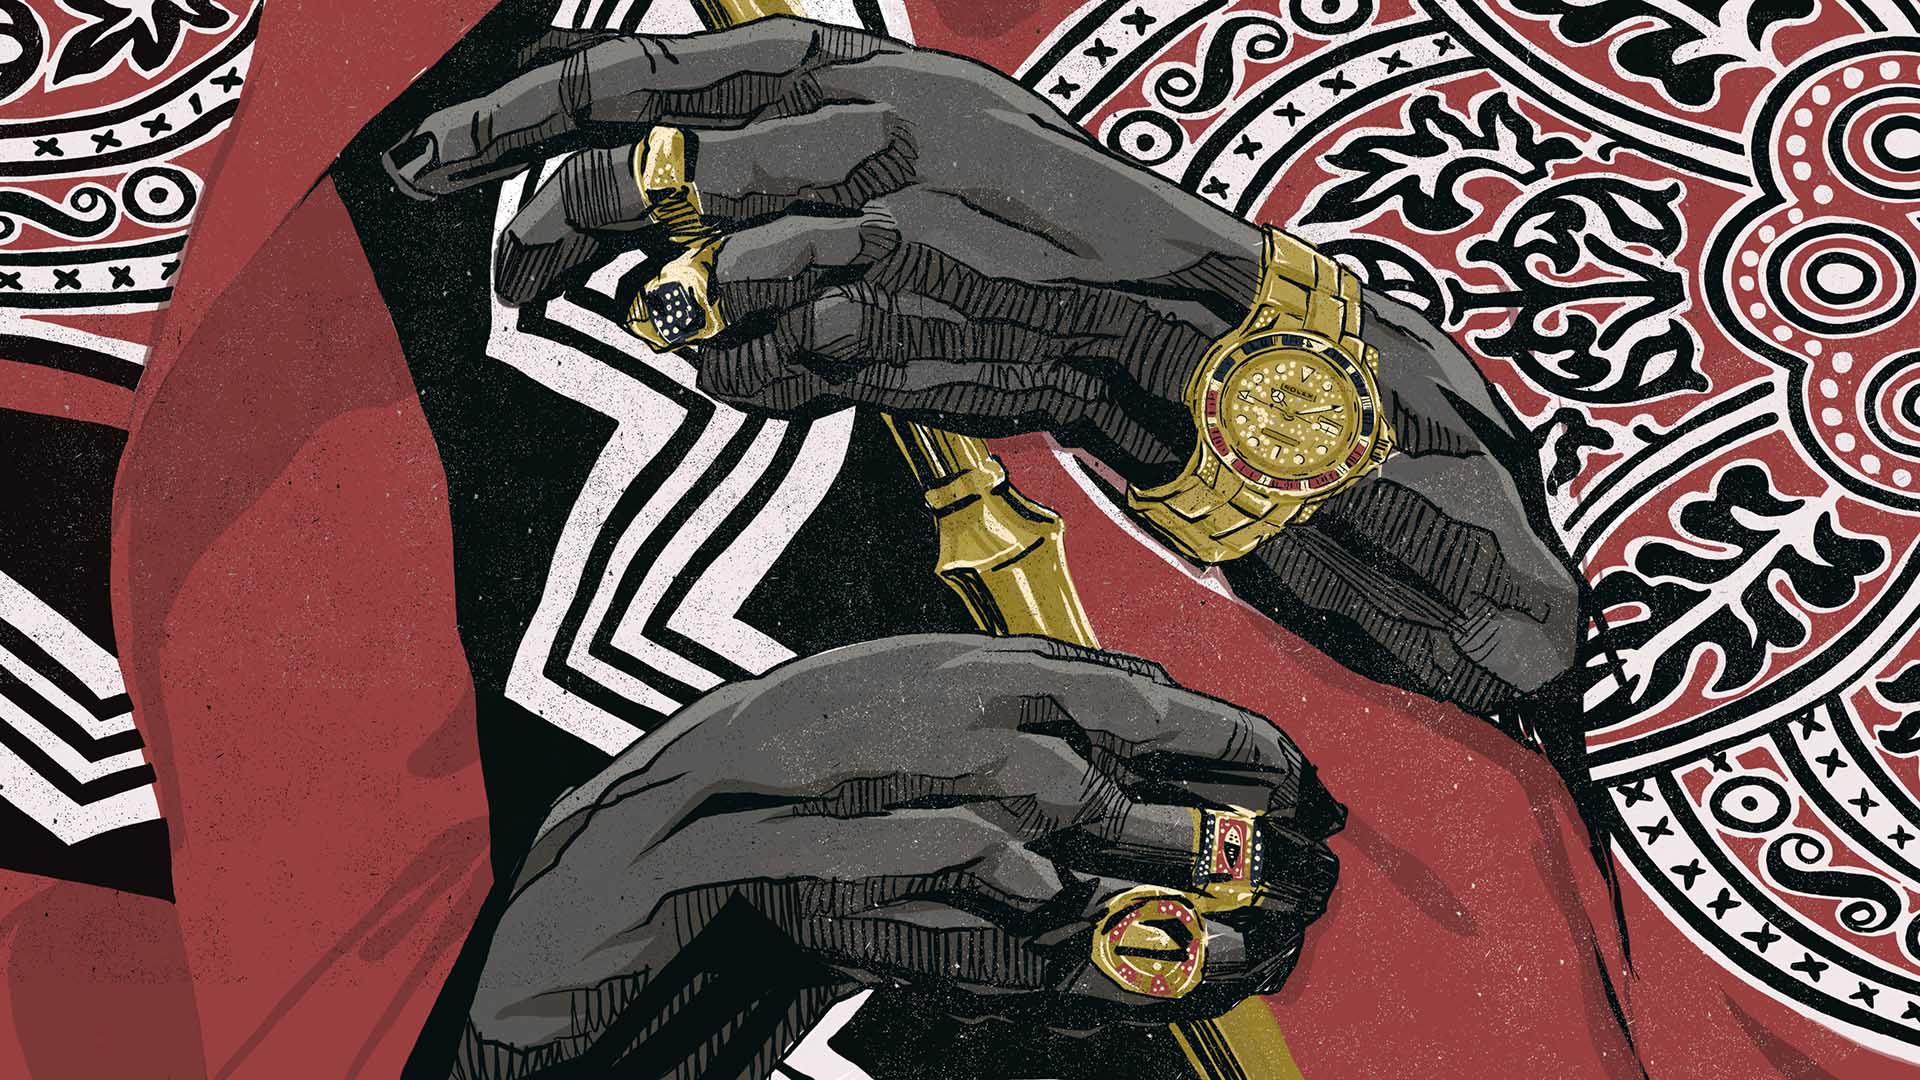 Illustration of two hands bedecked with gold jewellery and an expensive watch, holding a gold staff.